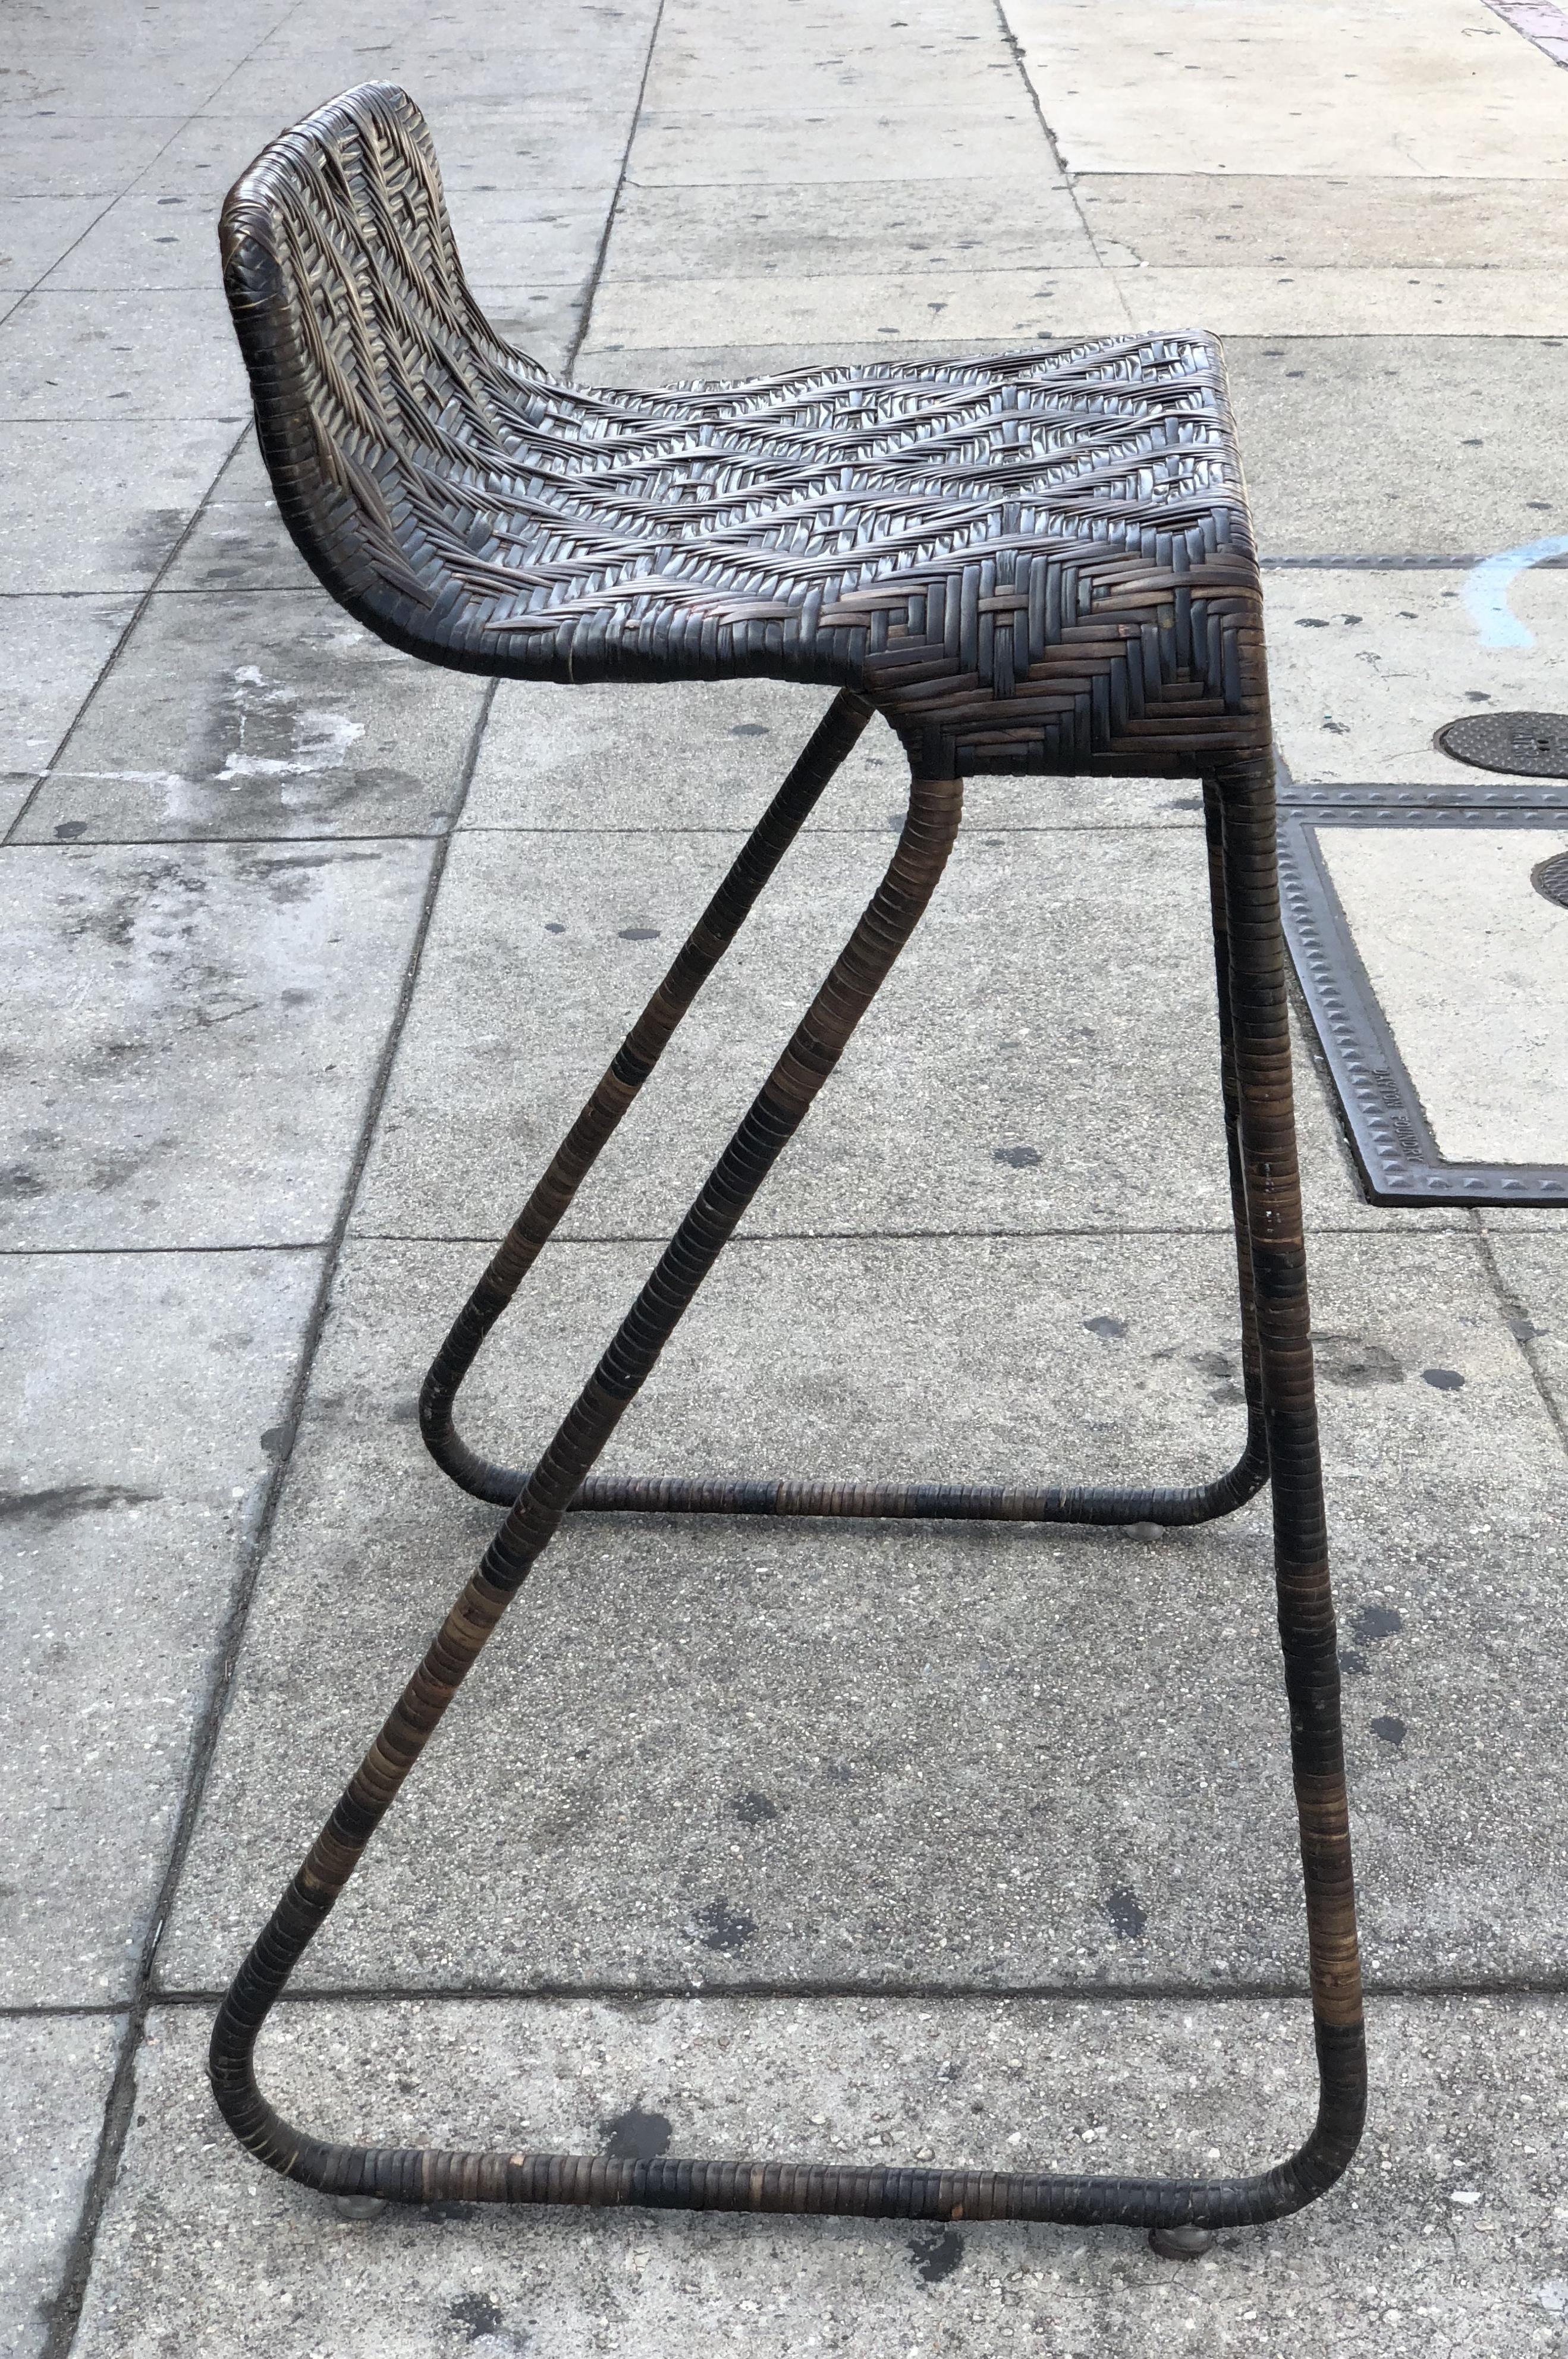 Unique and beautiful set of 3 counter stools with woven wicker embossed frames, the pieces are in good vintage condition with minor wear and only with a few nicks and scrapes to the metal and material.
Measurements:
31